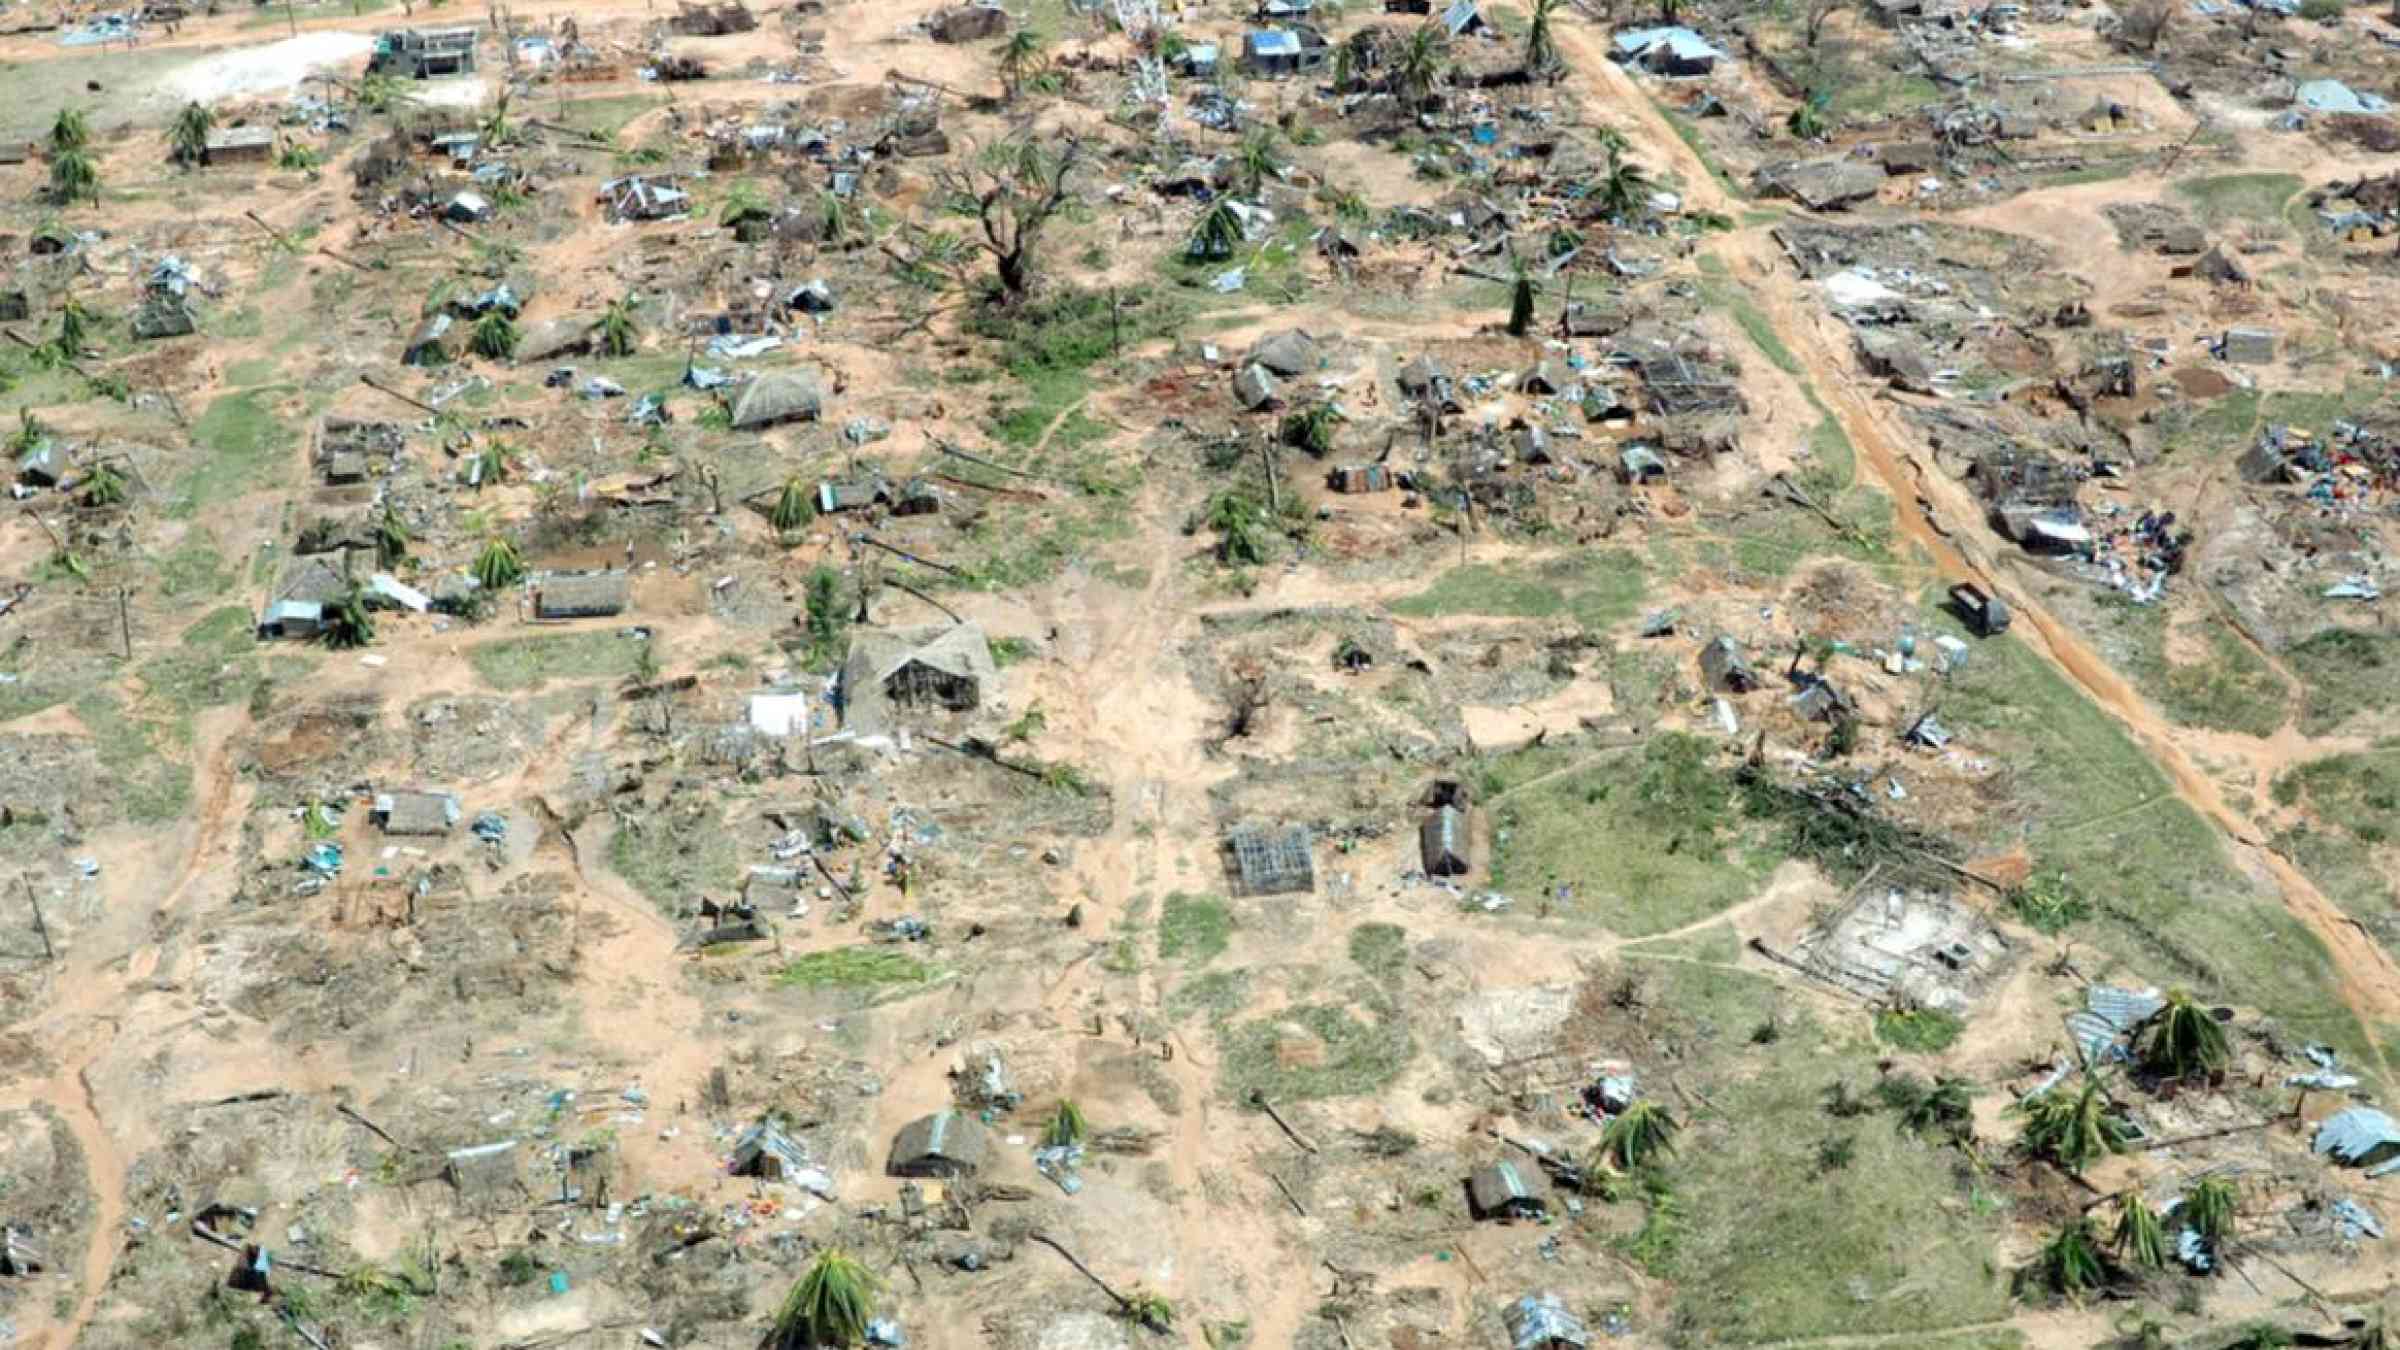 Aftermath of cyclone Kenneth in Mozambique, 2019. fivepointsix/Shutterstock